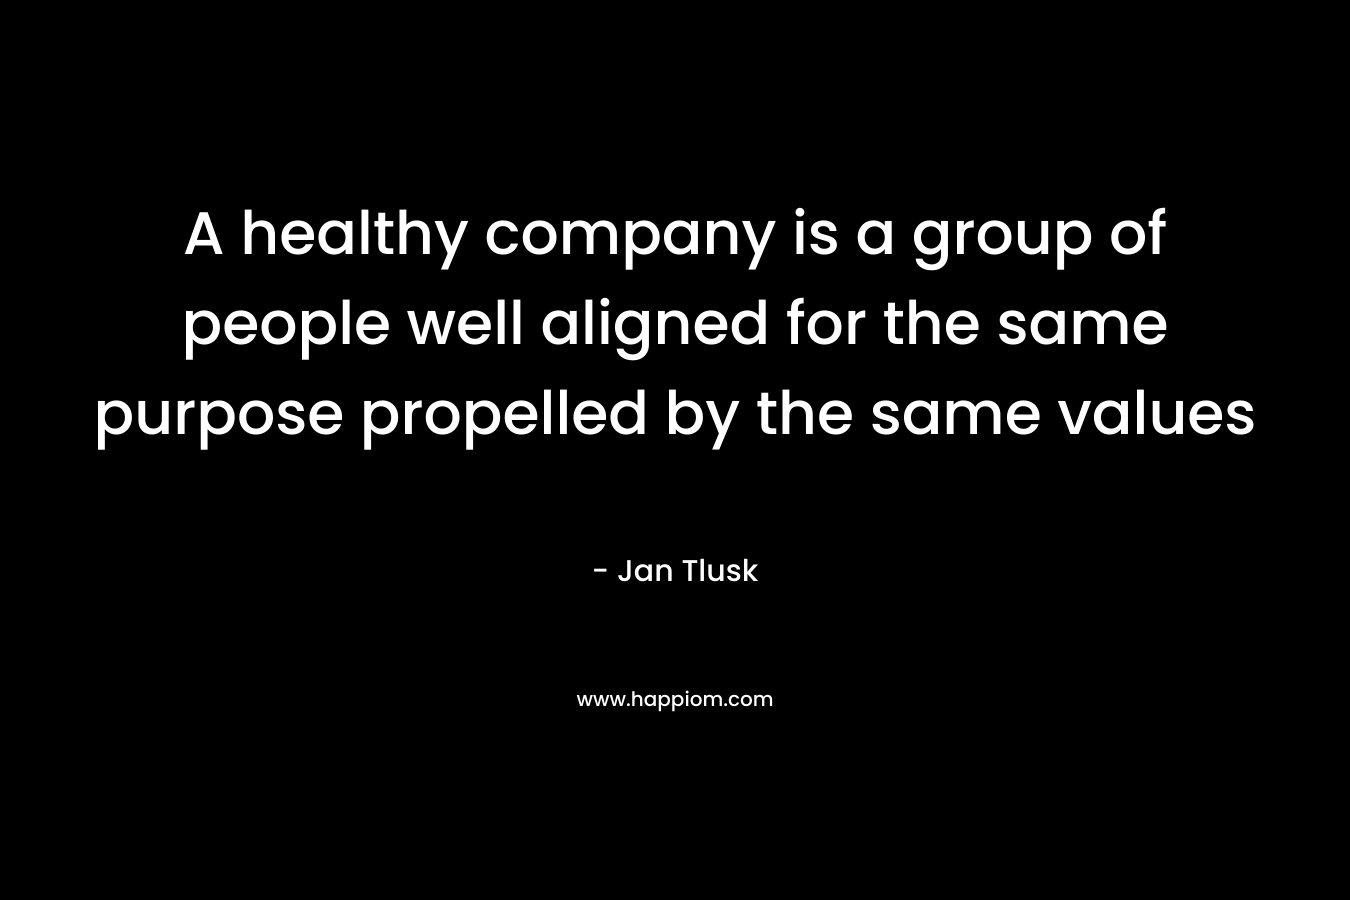 A healthy company is a group of people well aligned for the same purpose propelled by the same values – Jan Tlusk